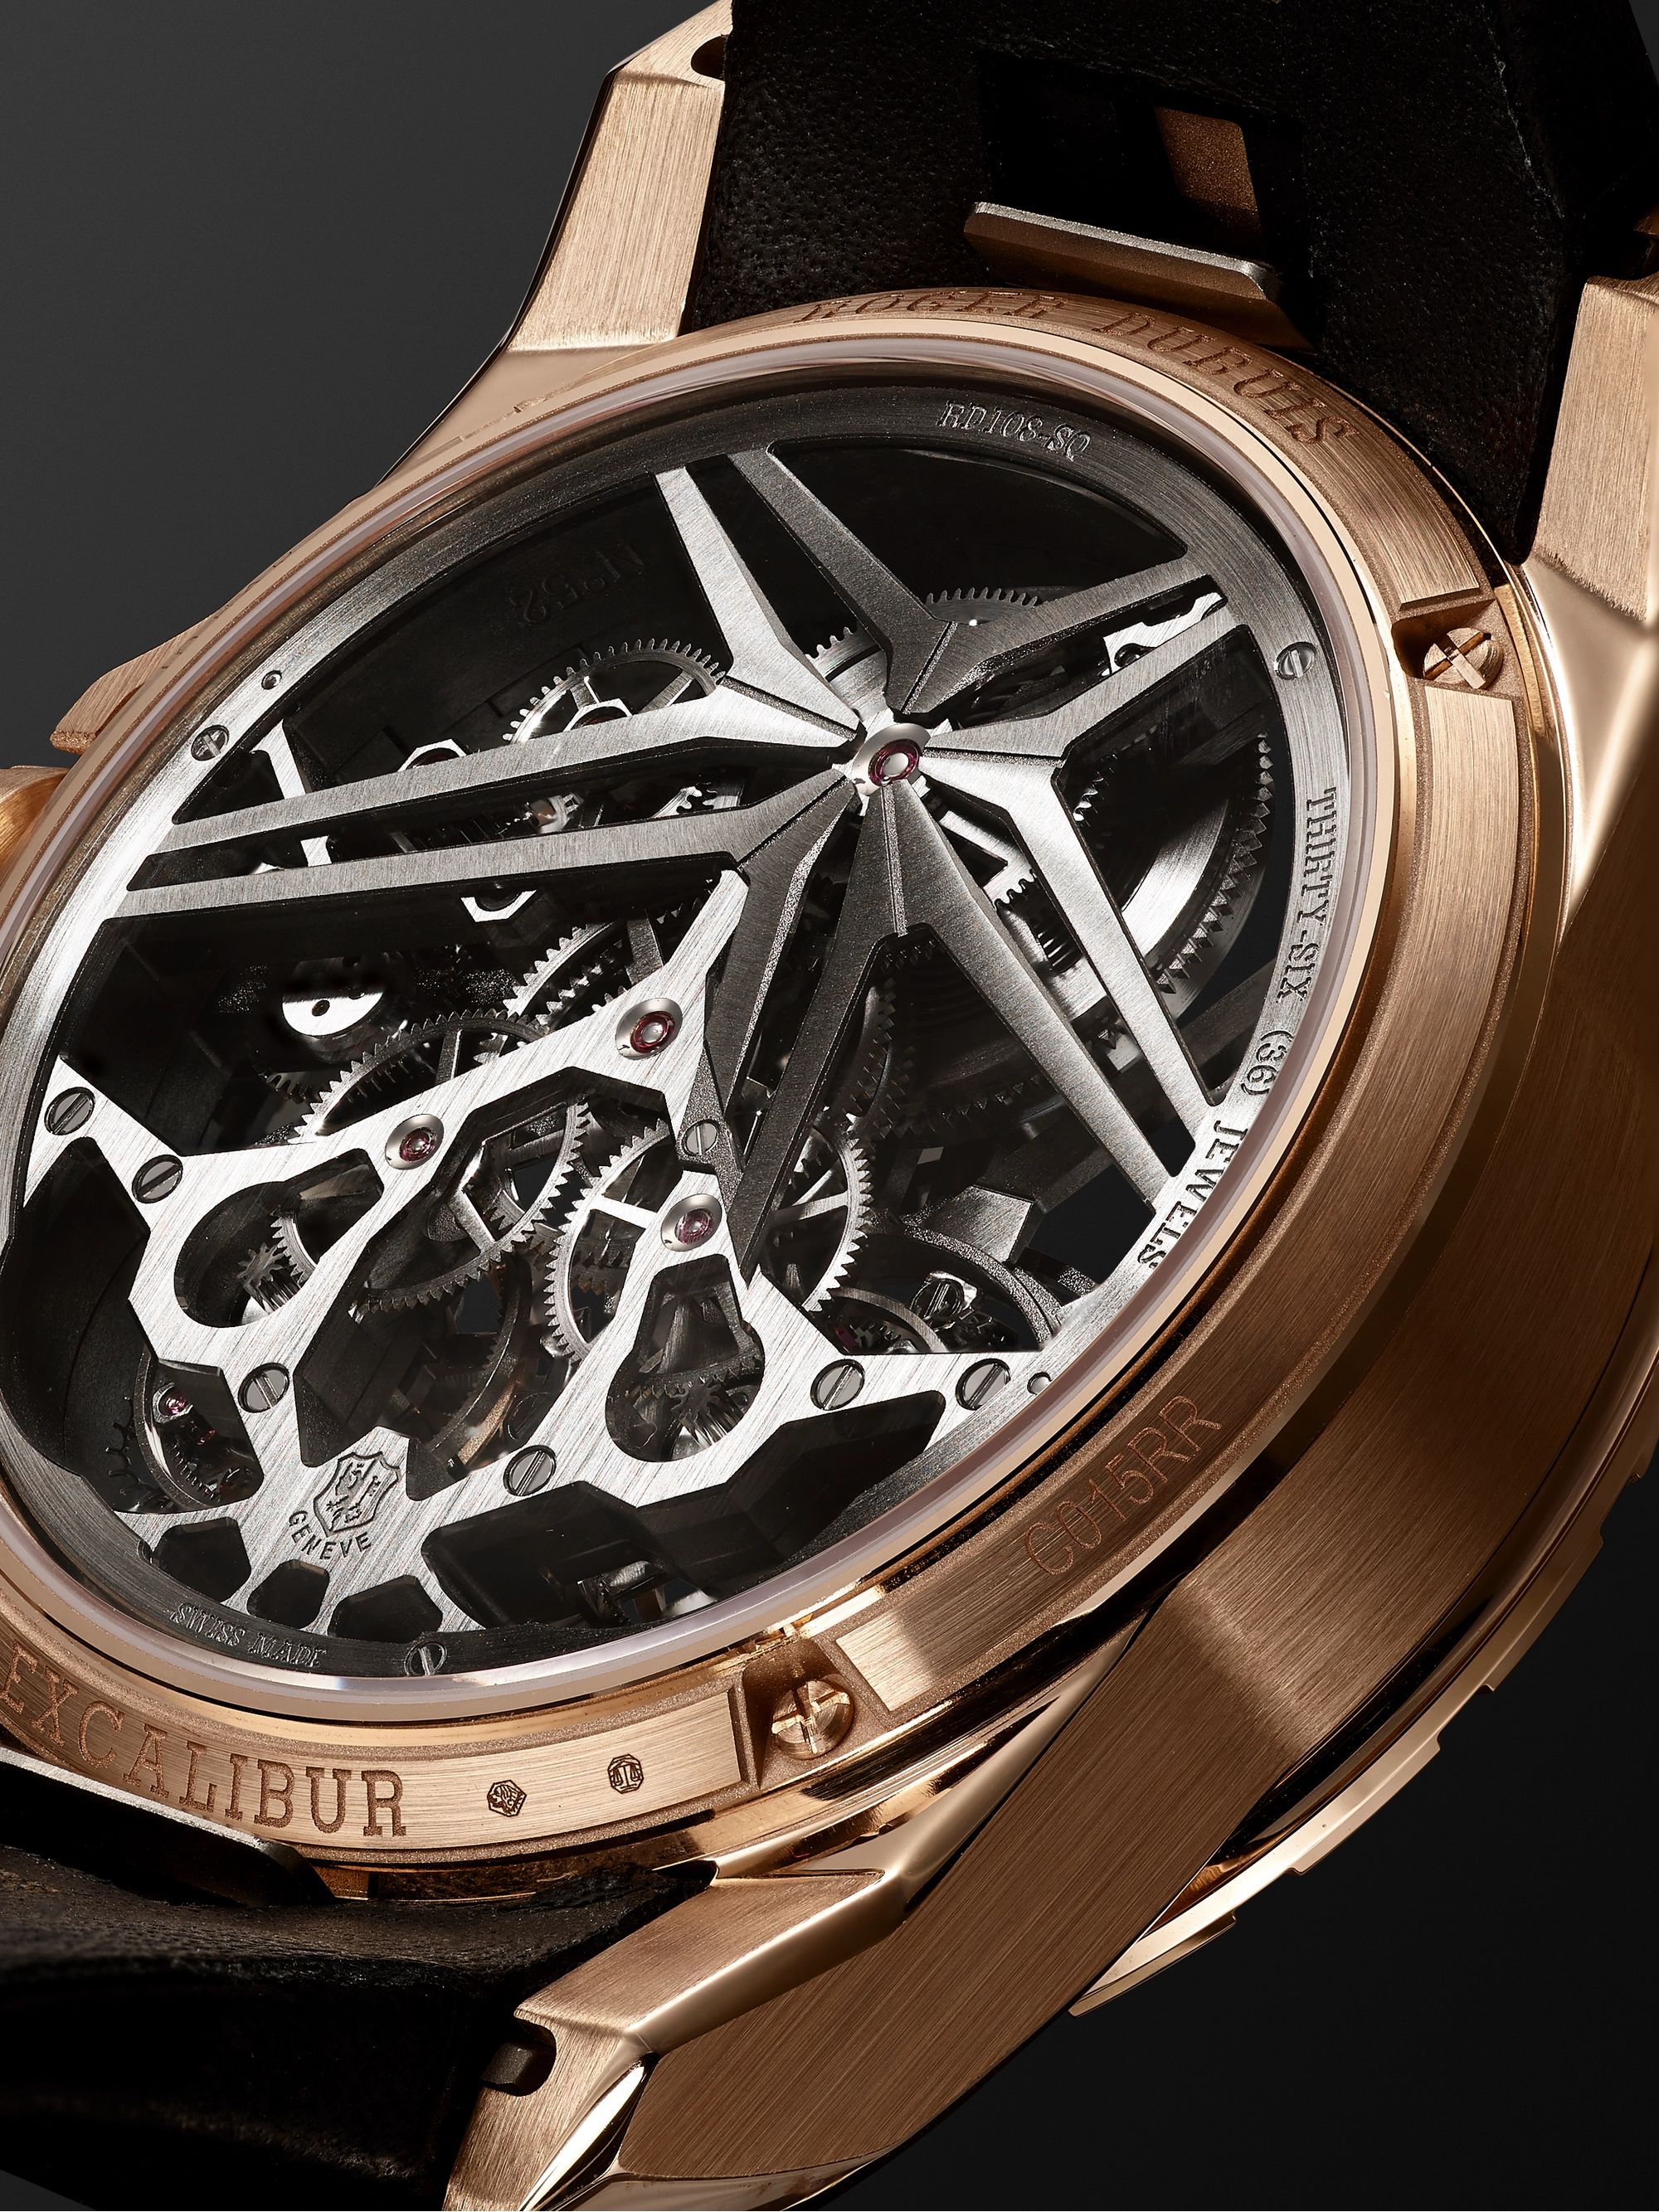 ROGER DUBUIS Excalibur EON Gold Limited Edition Hand-Wound Double Flying Tourbillon 45mm 18-Karat Pink-Gold and Leather Watch, Ref. No. DBEX0818